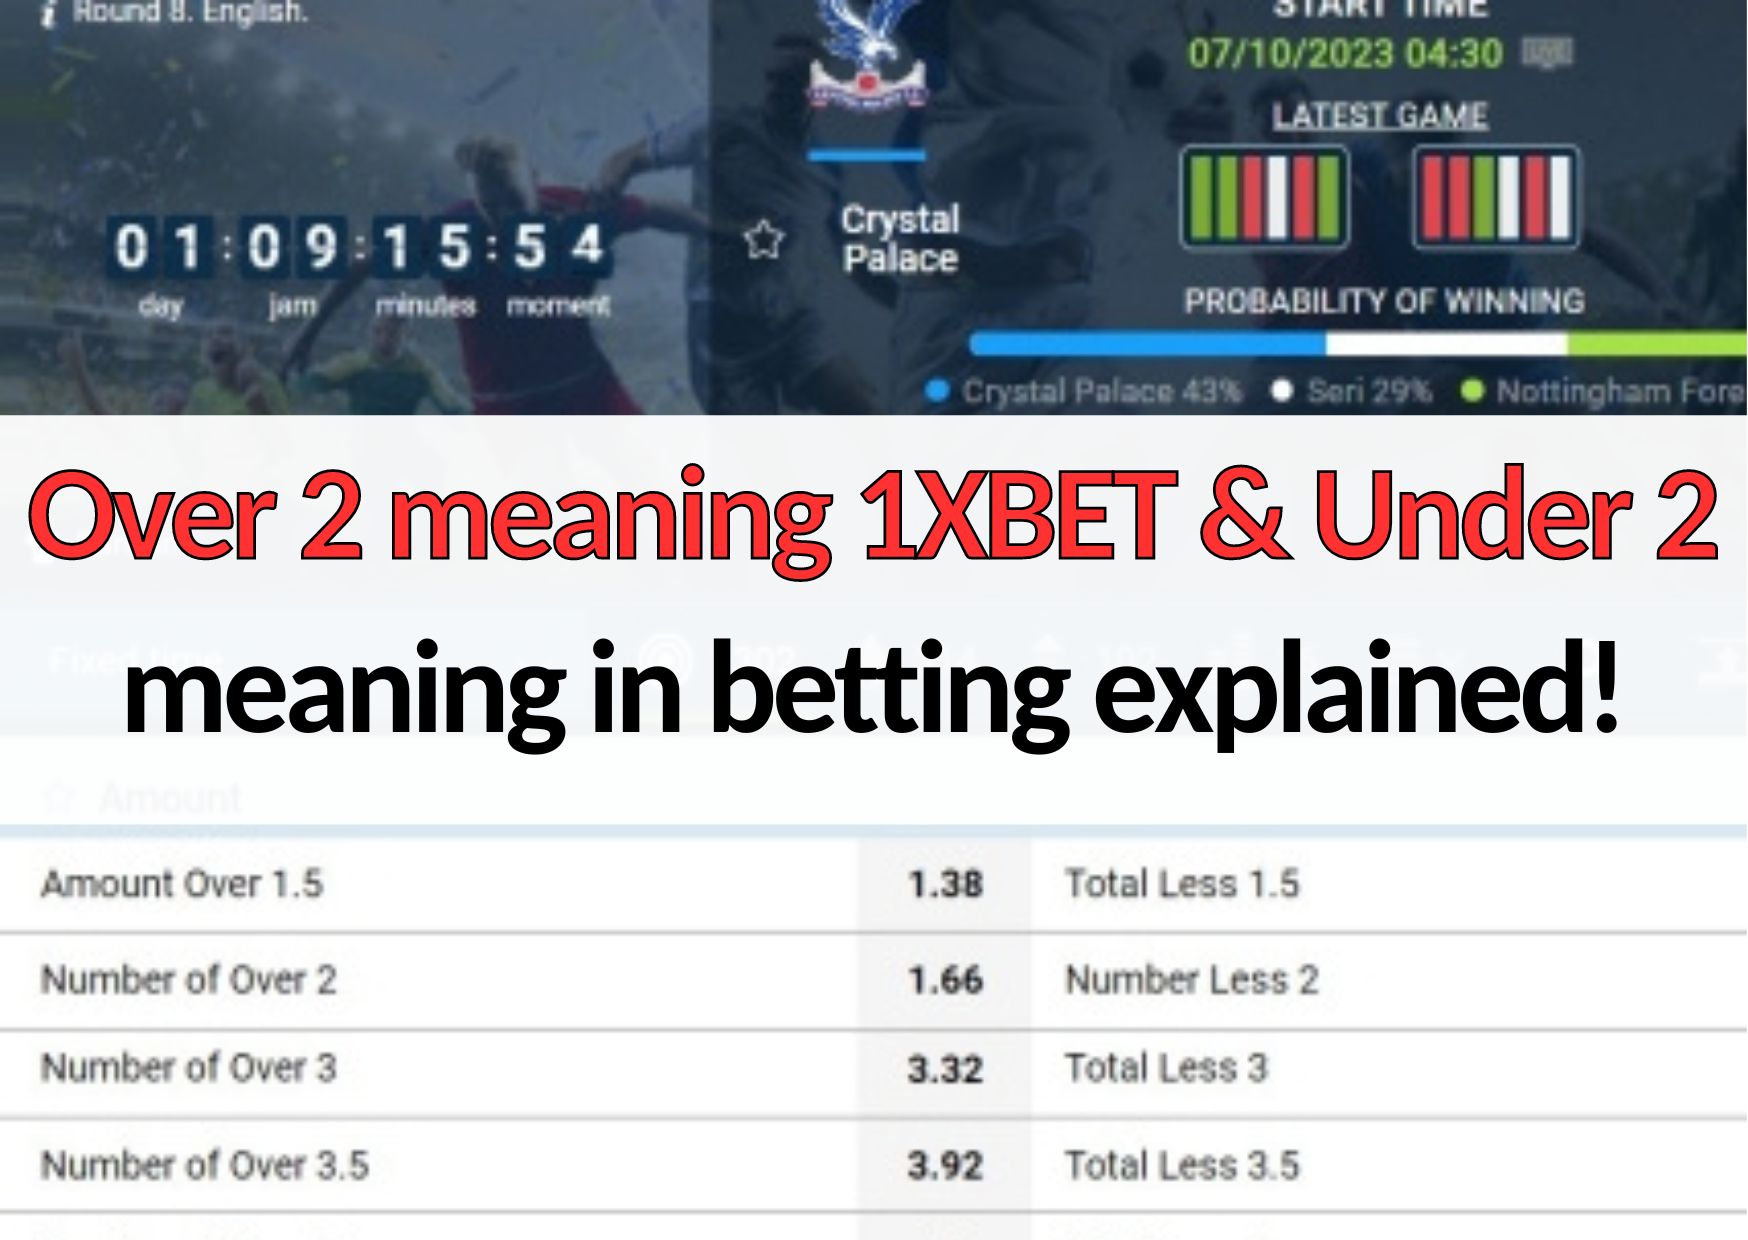 88malay over 2 meaning 1xbet and under 2 meaning in 1xbet